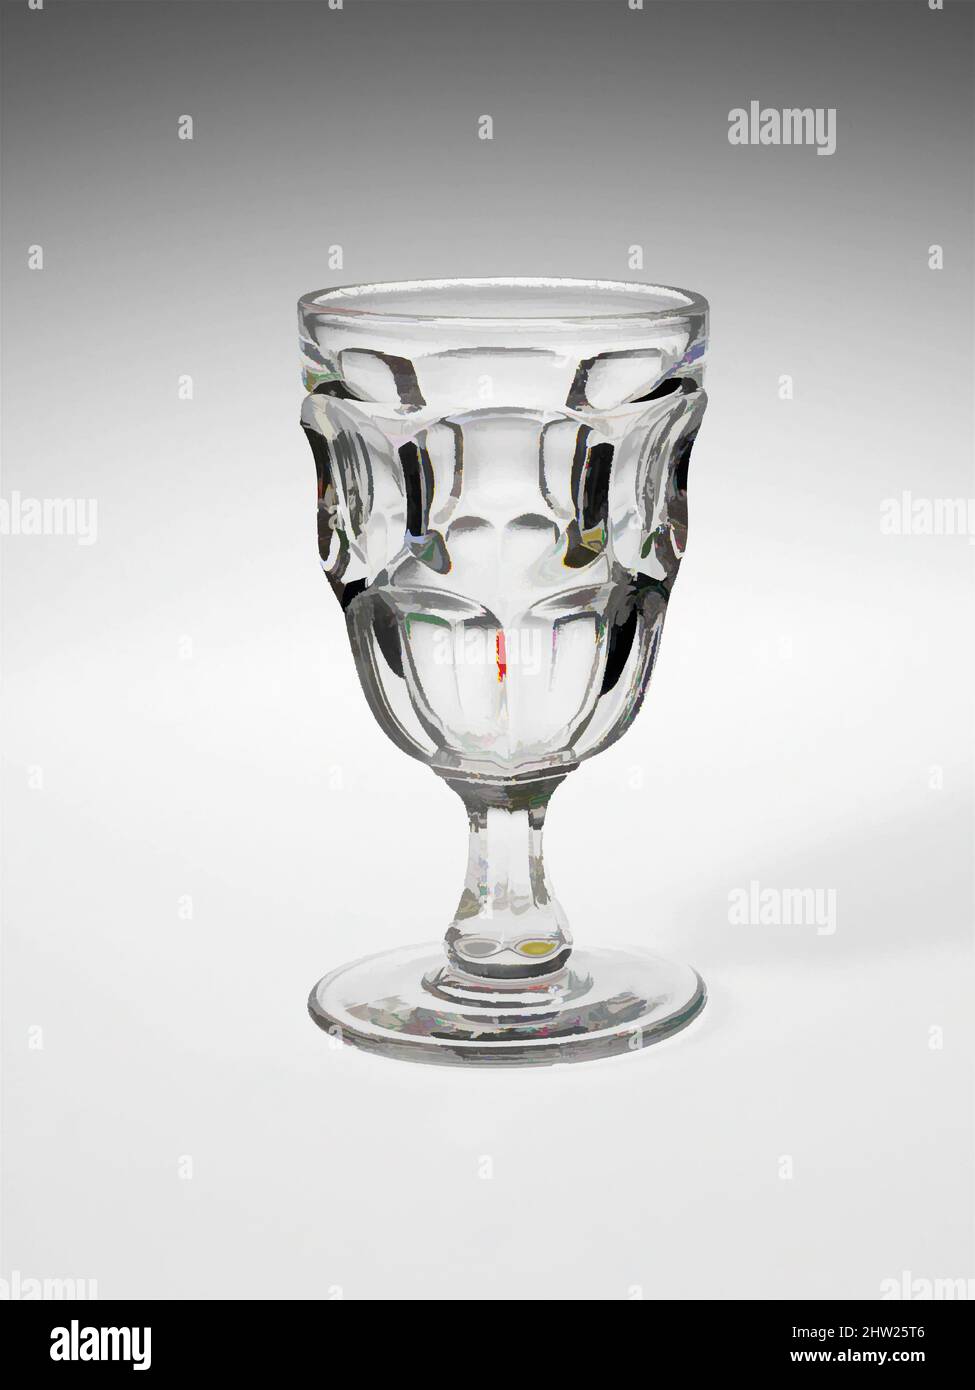 Art inspired by Goblet, 1830–70, Made in United States, American, Pressed glass, H. 6 in. (15.2 cm), Glass, With the development of new formulas and techniques, glass-pressing technology had improved markedly by the late 1840s. By this time, pressed tablewares were being produced in, Classic works modernized by Artotop with a splash of modernity. Shapes, color and value, eye-catching visual impact on art. Emotions through freedom of artworks in a contemporary way. A timeless message pursuing a wildly creative new direction. Artists turning to the digital medium and creating the Artotop NFT Stock Photo